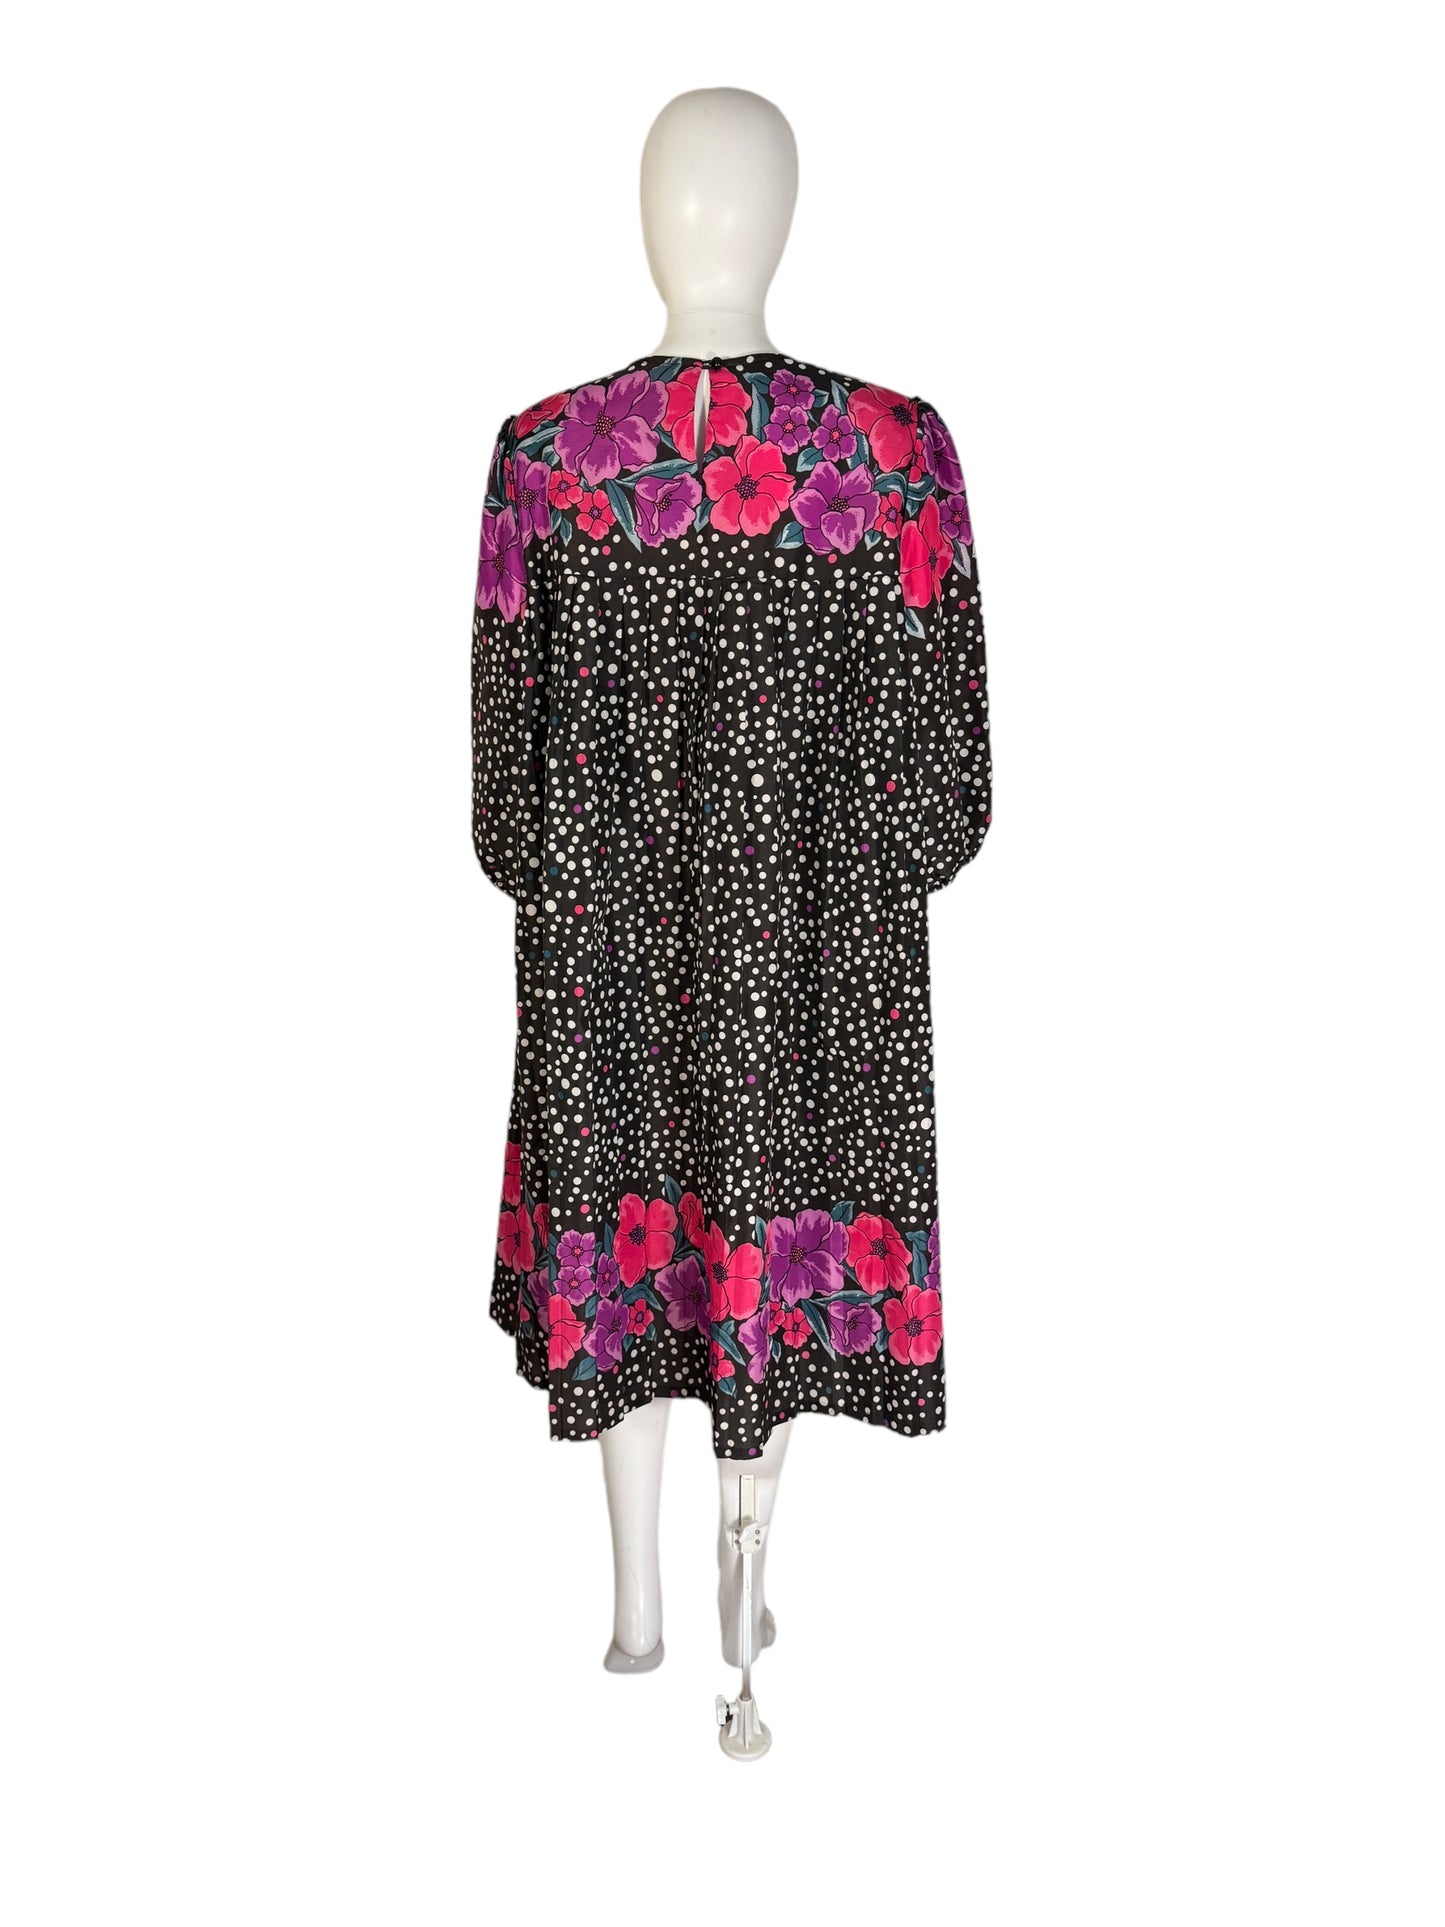 Vintage Floral Day Dress Night Gown 1980s Loungewear